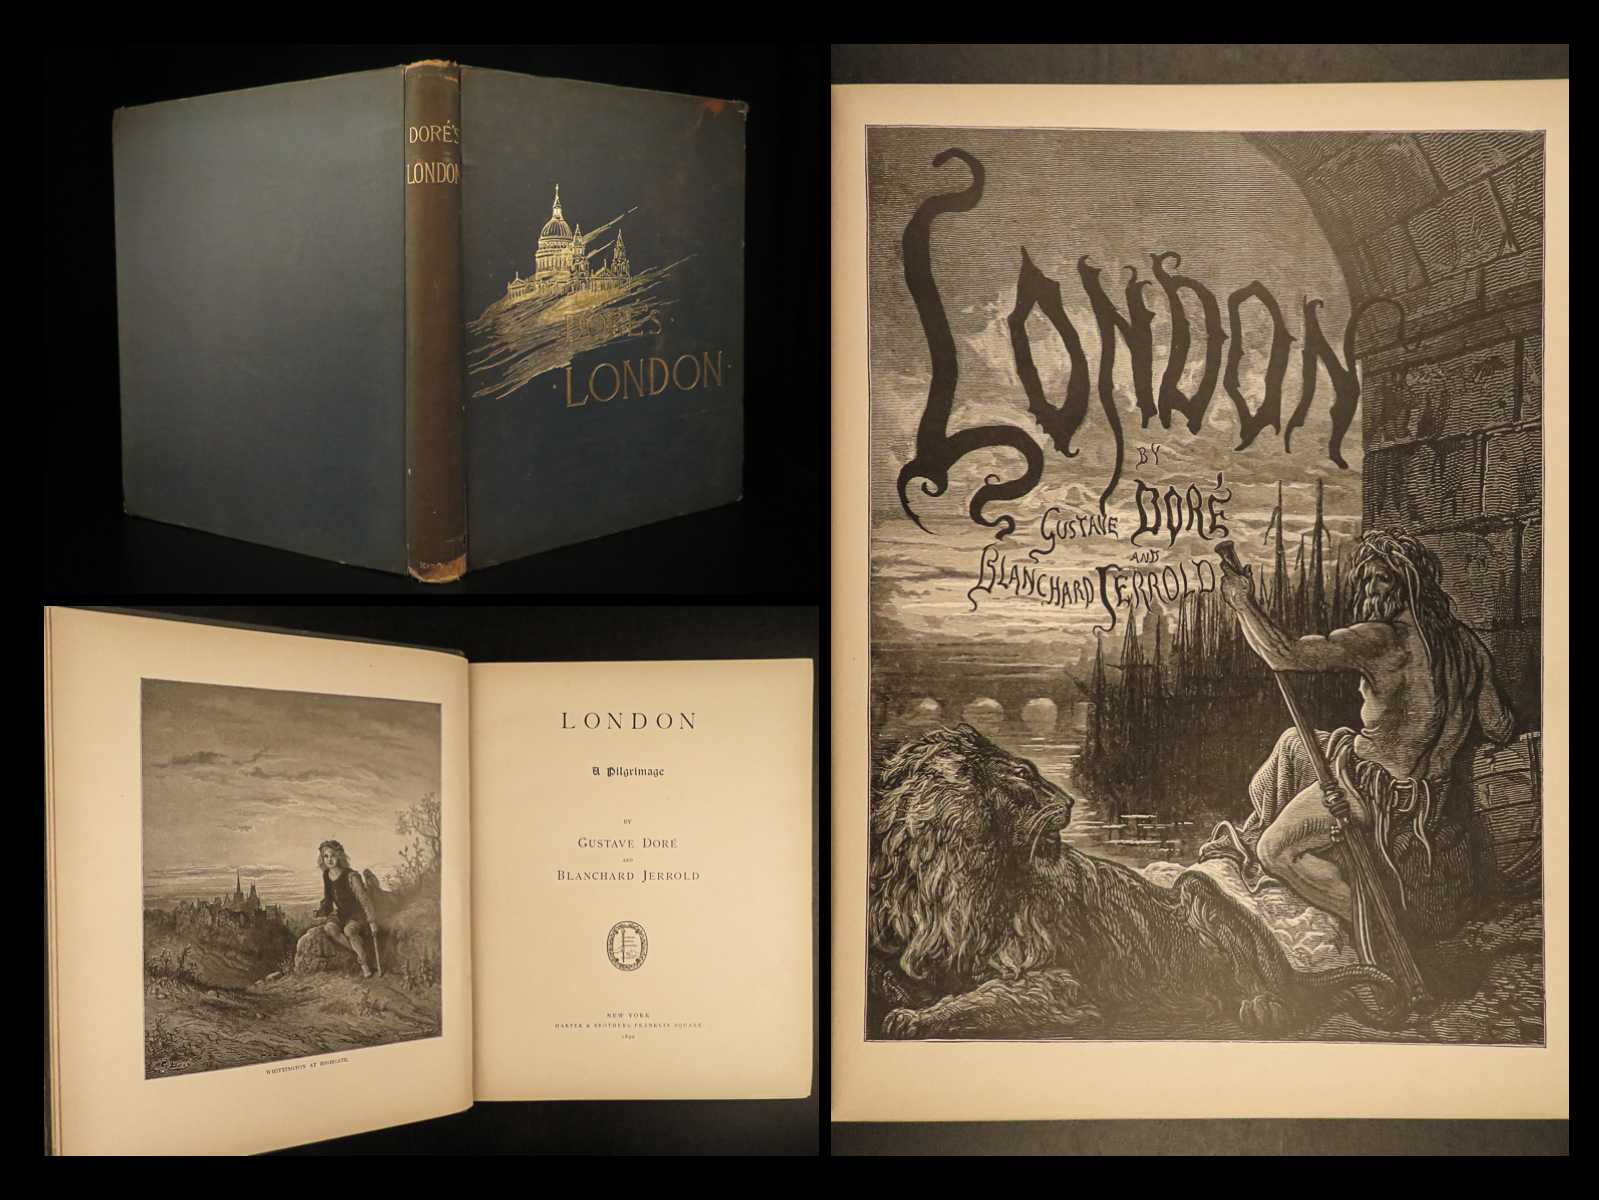 1890 LONDON A Pilgrimage Illustrated Gustave Dore PLATES English